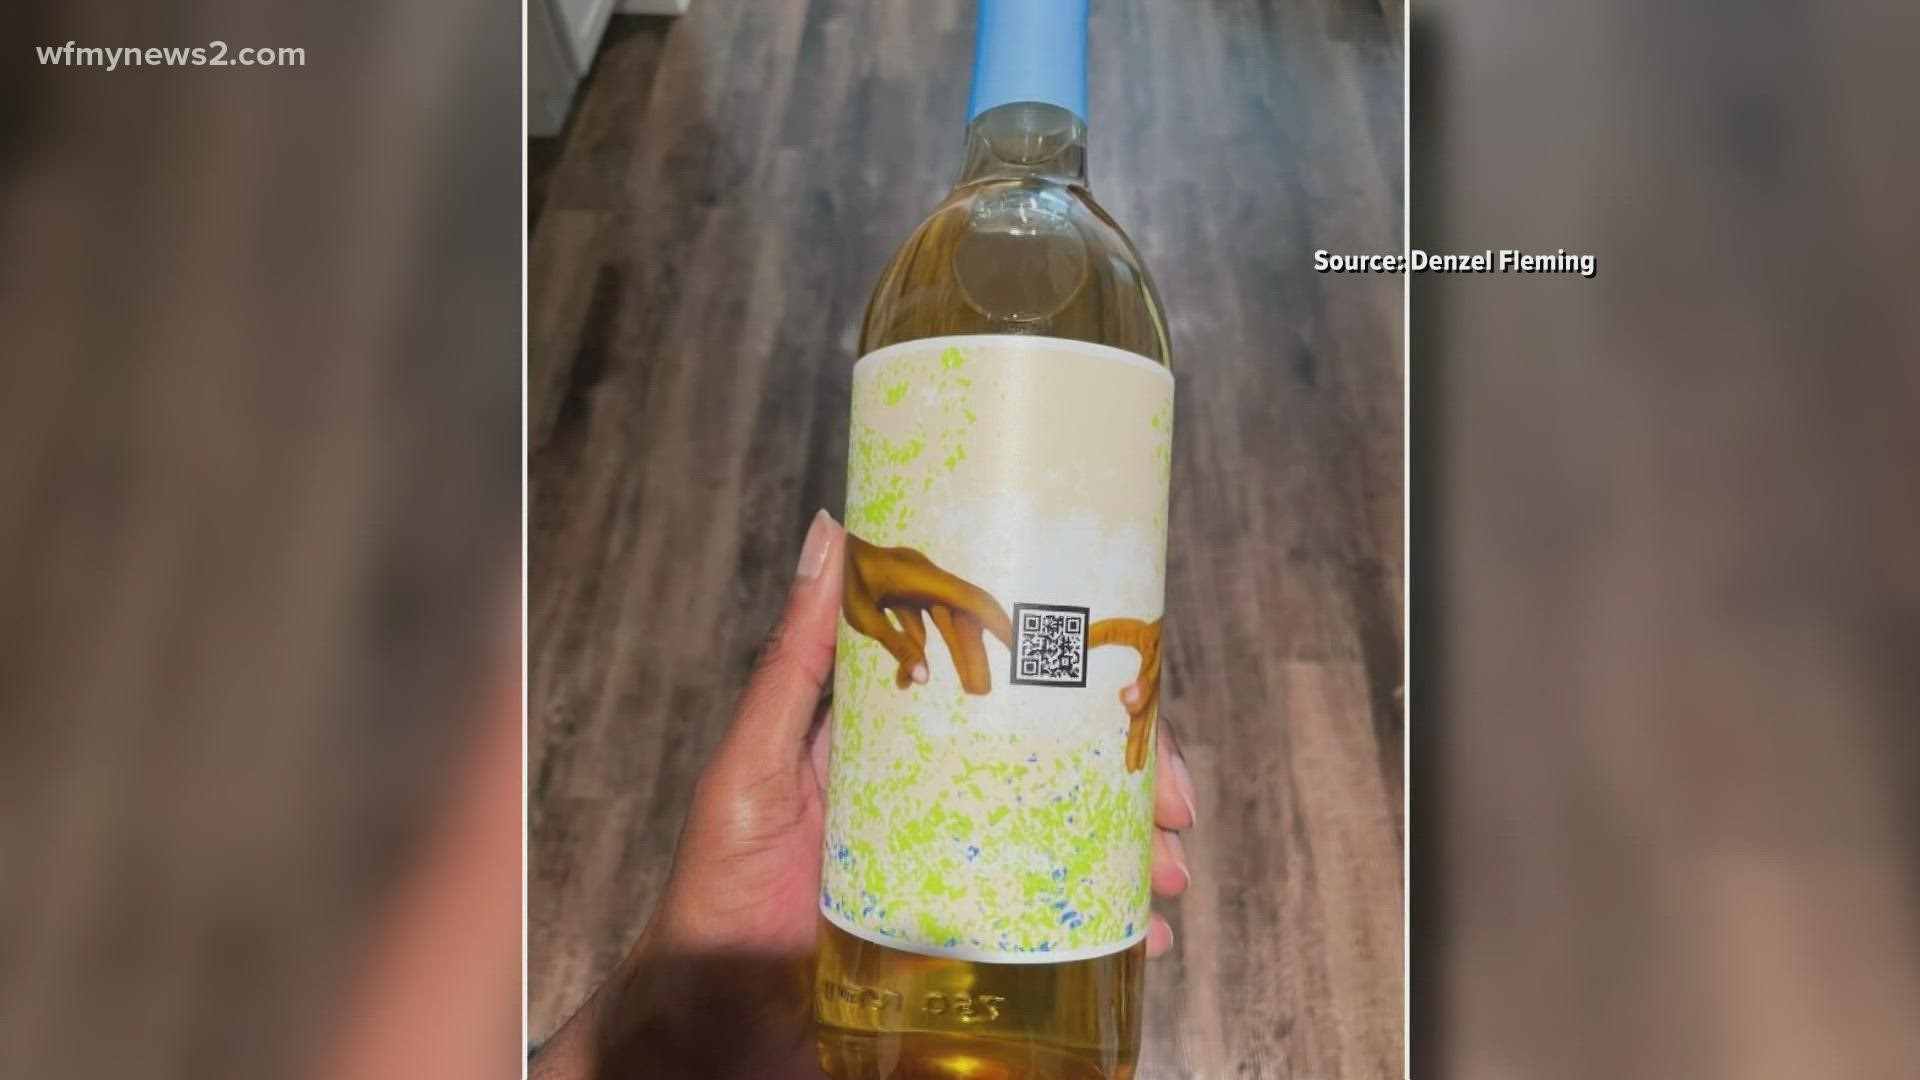 Denzel Fleming created his own wine line called, “Something to Hold You.”